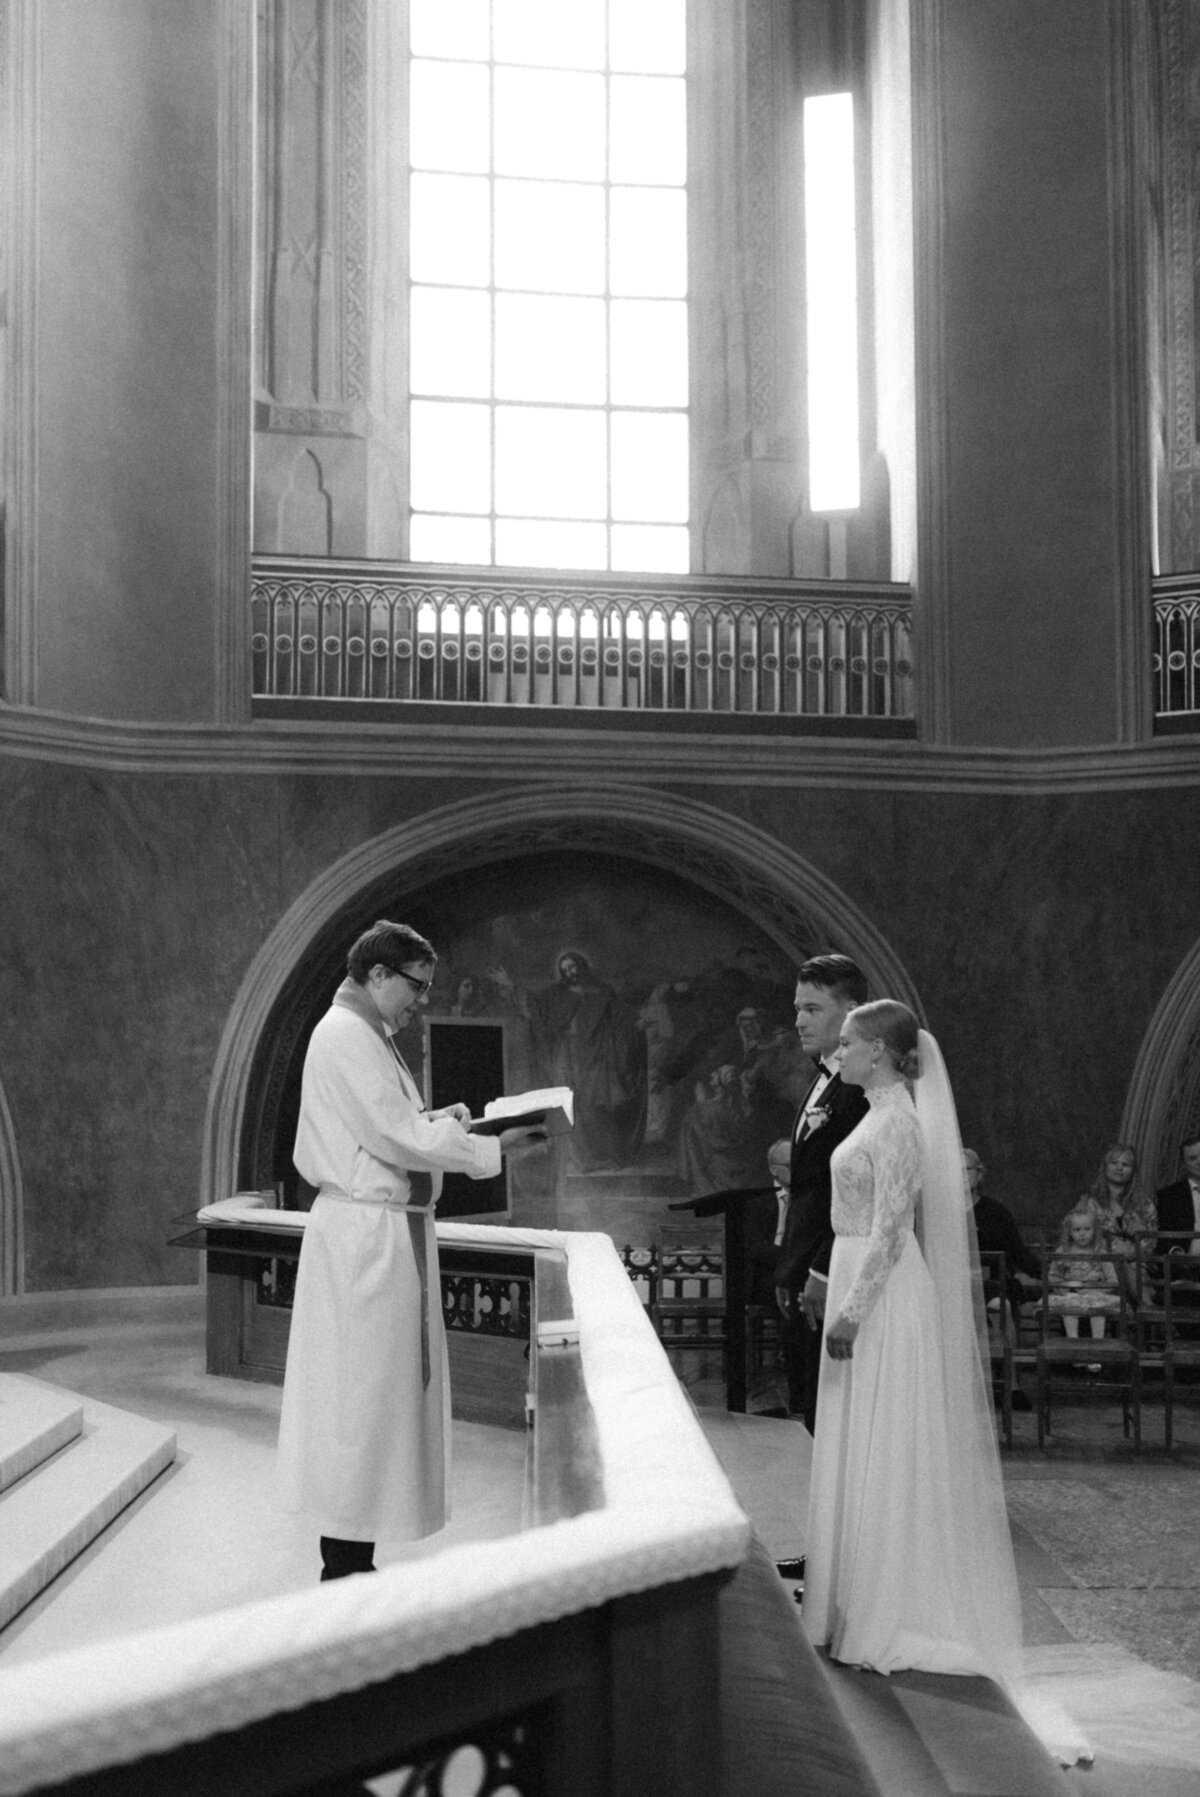 Documentary wedding photograph of a wedding ceremony. Bride and groom are by the altar.